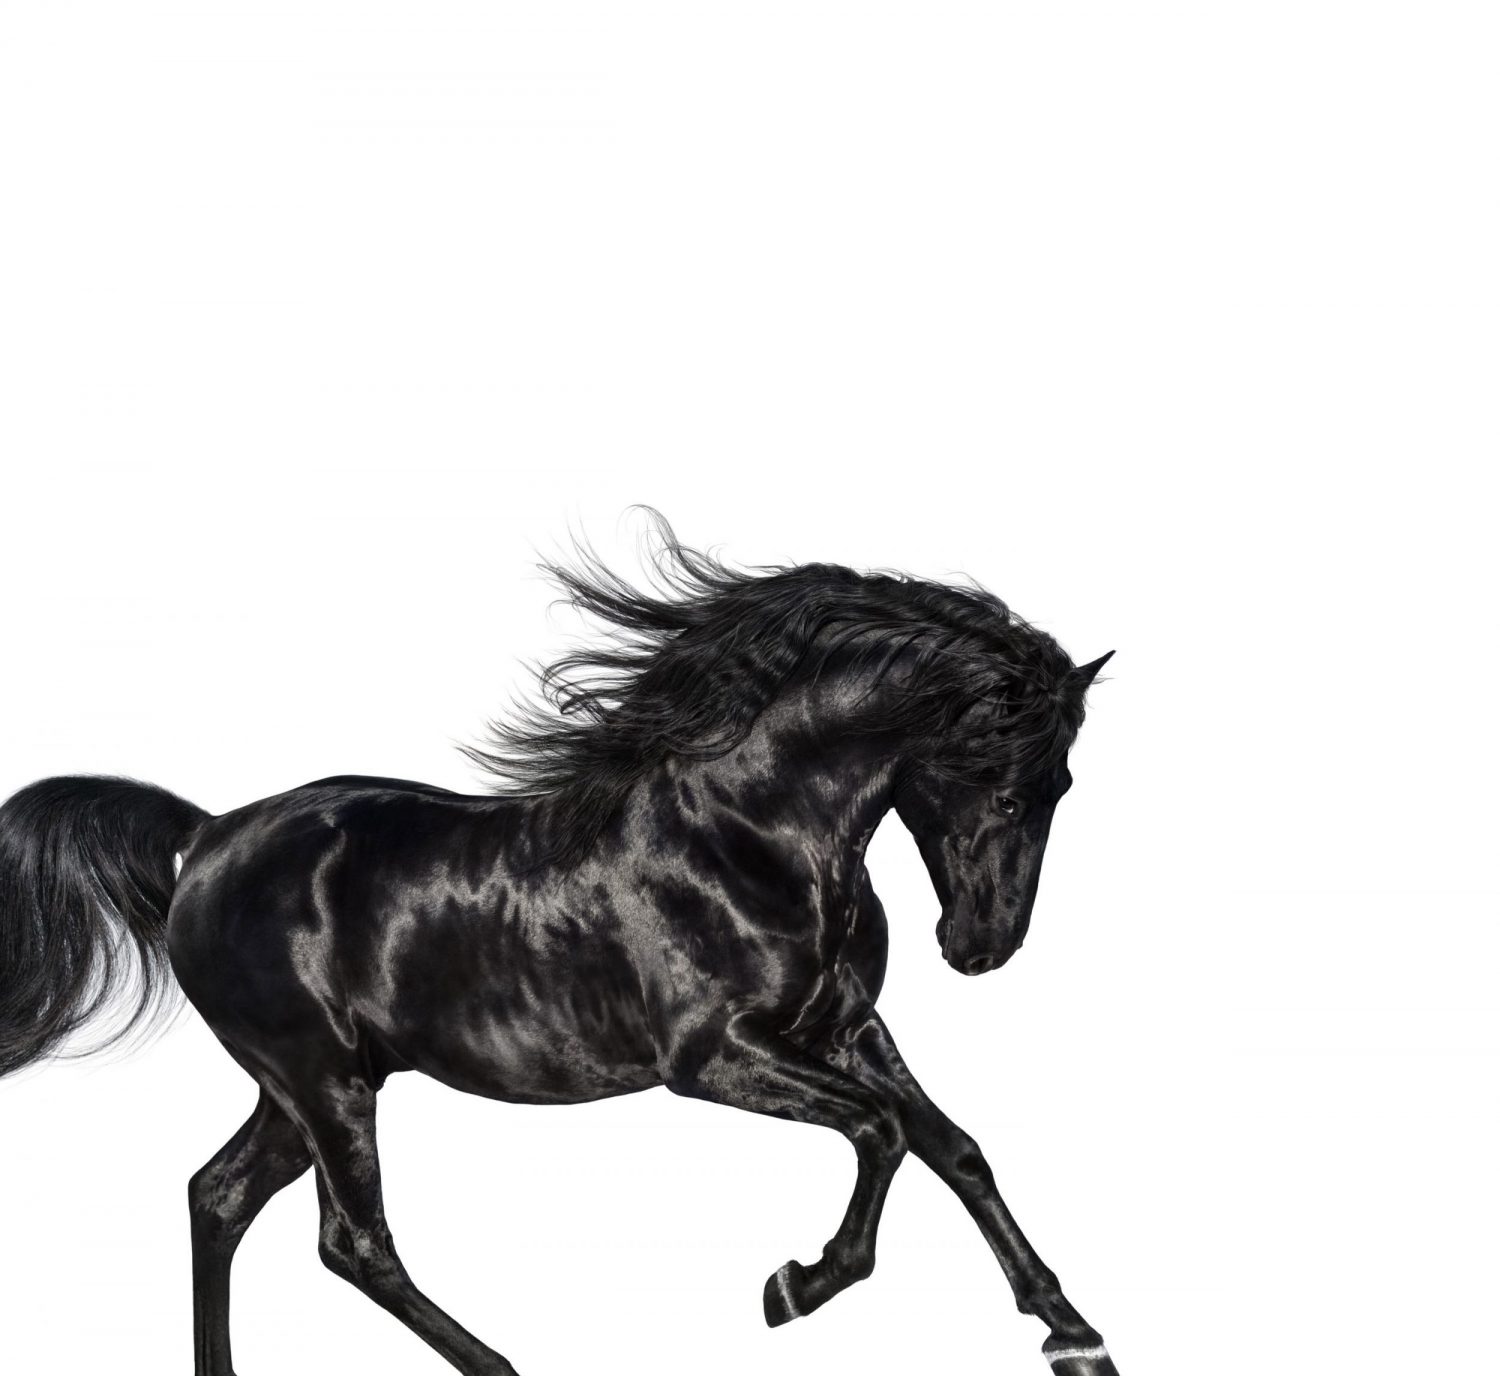 old town road lil nas x free mp3 download